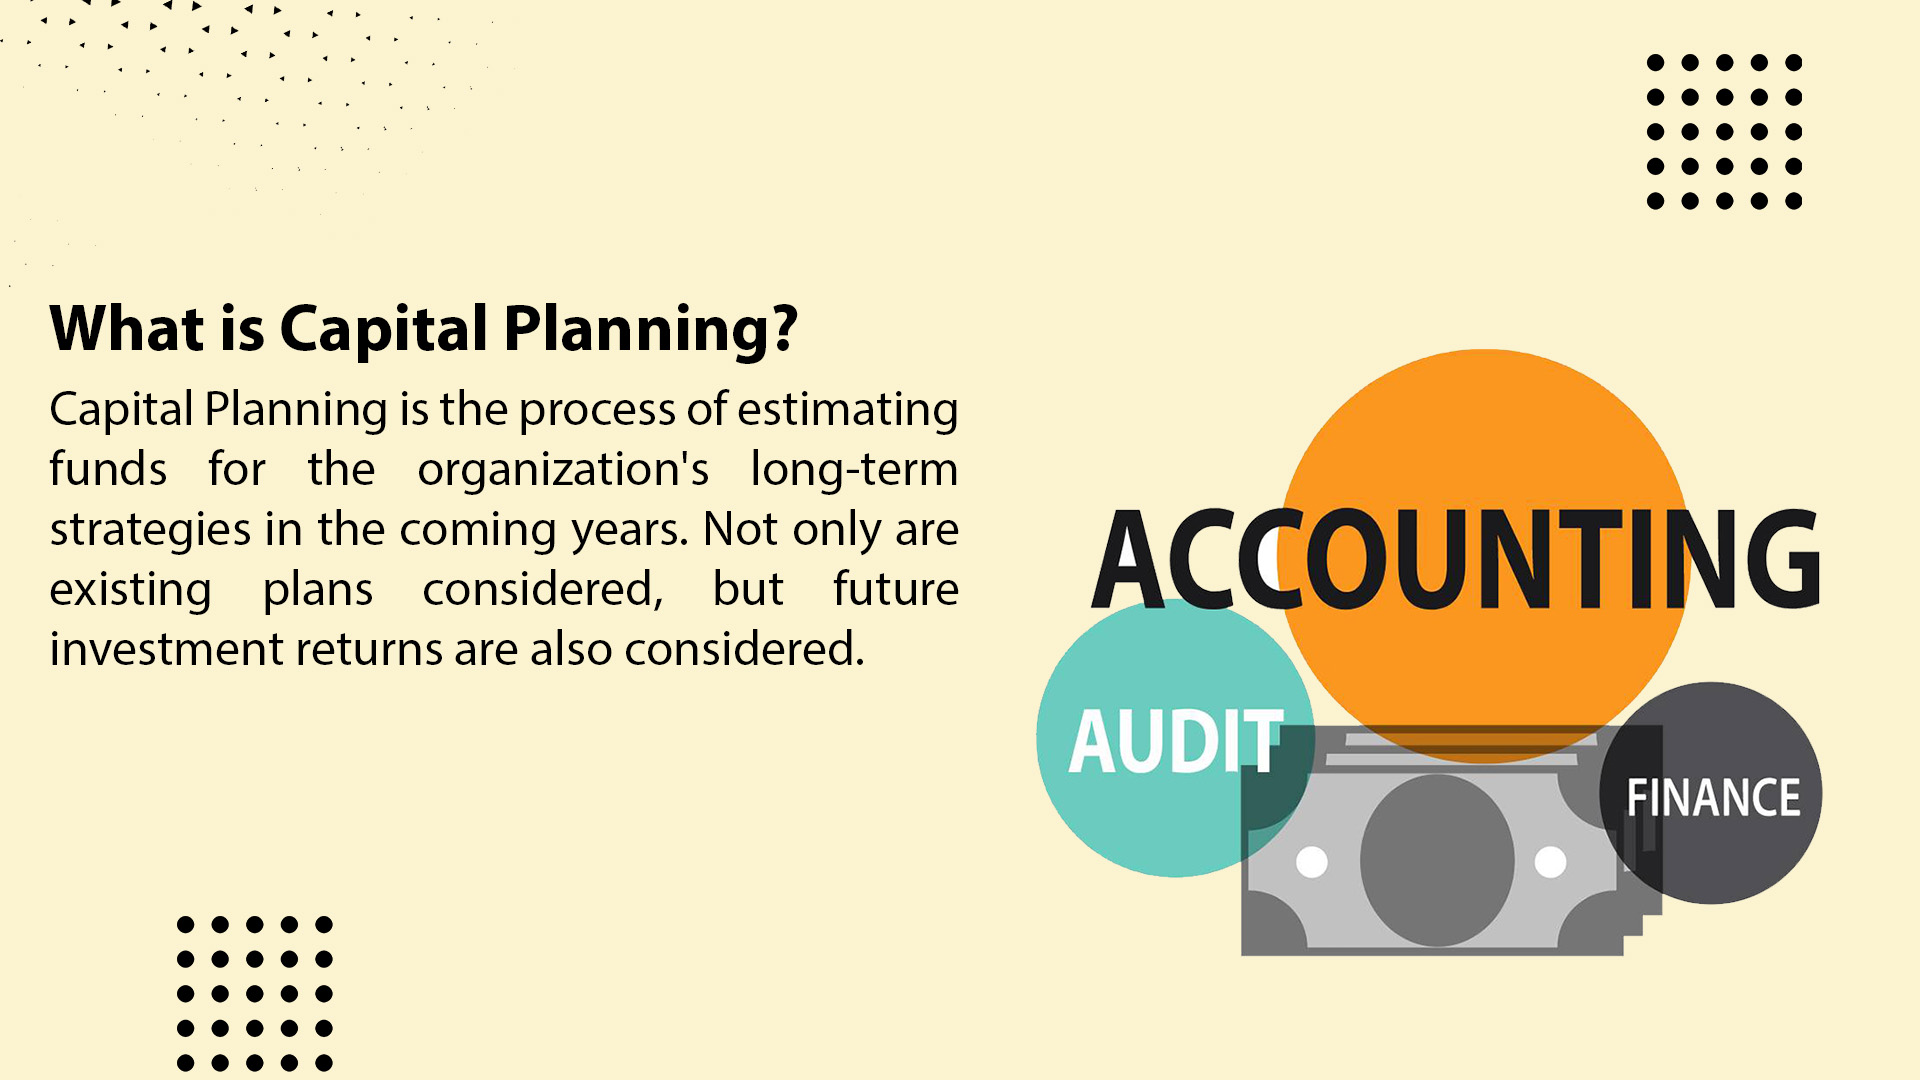 What is Capital Planning?